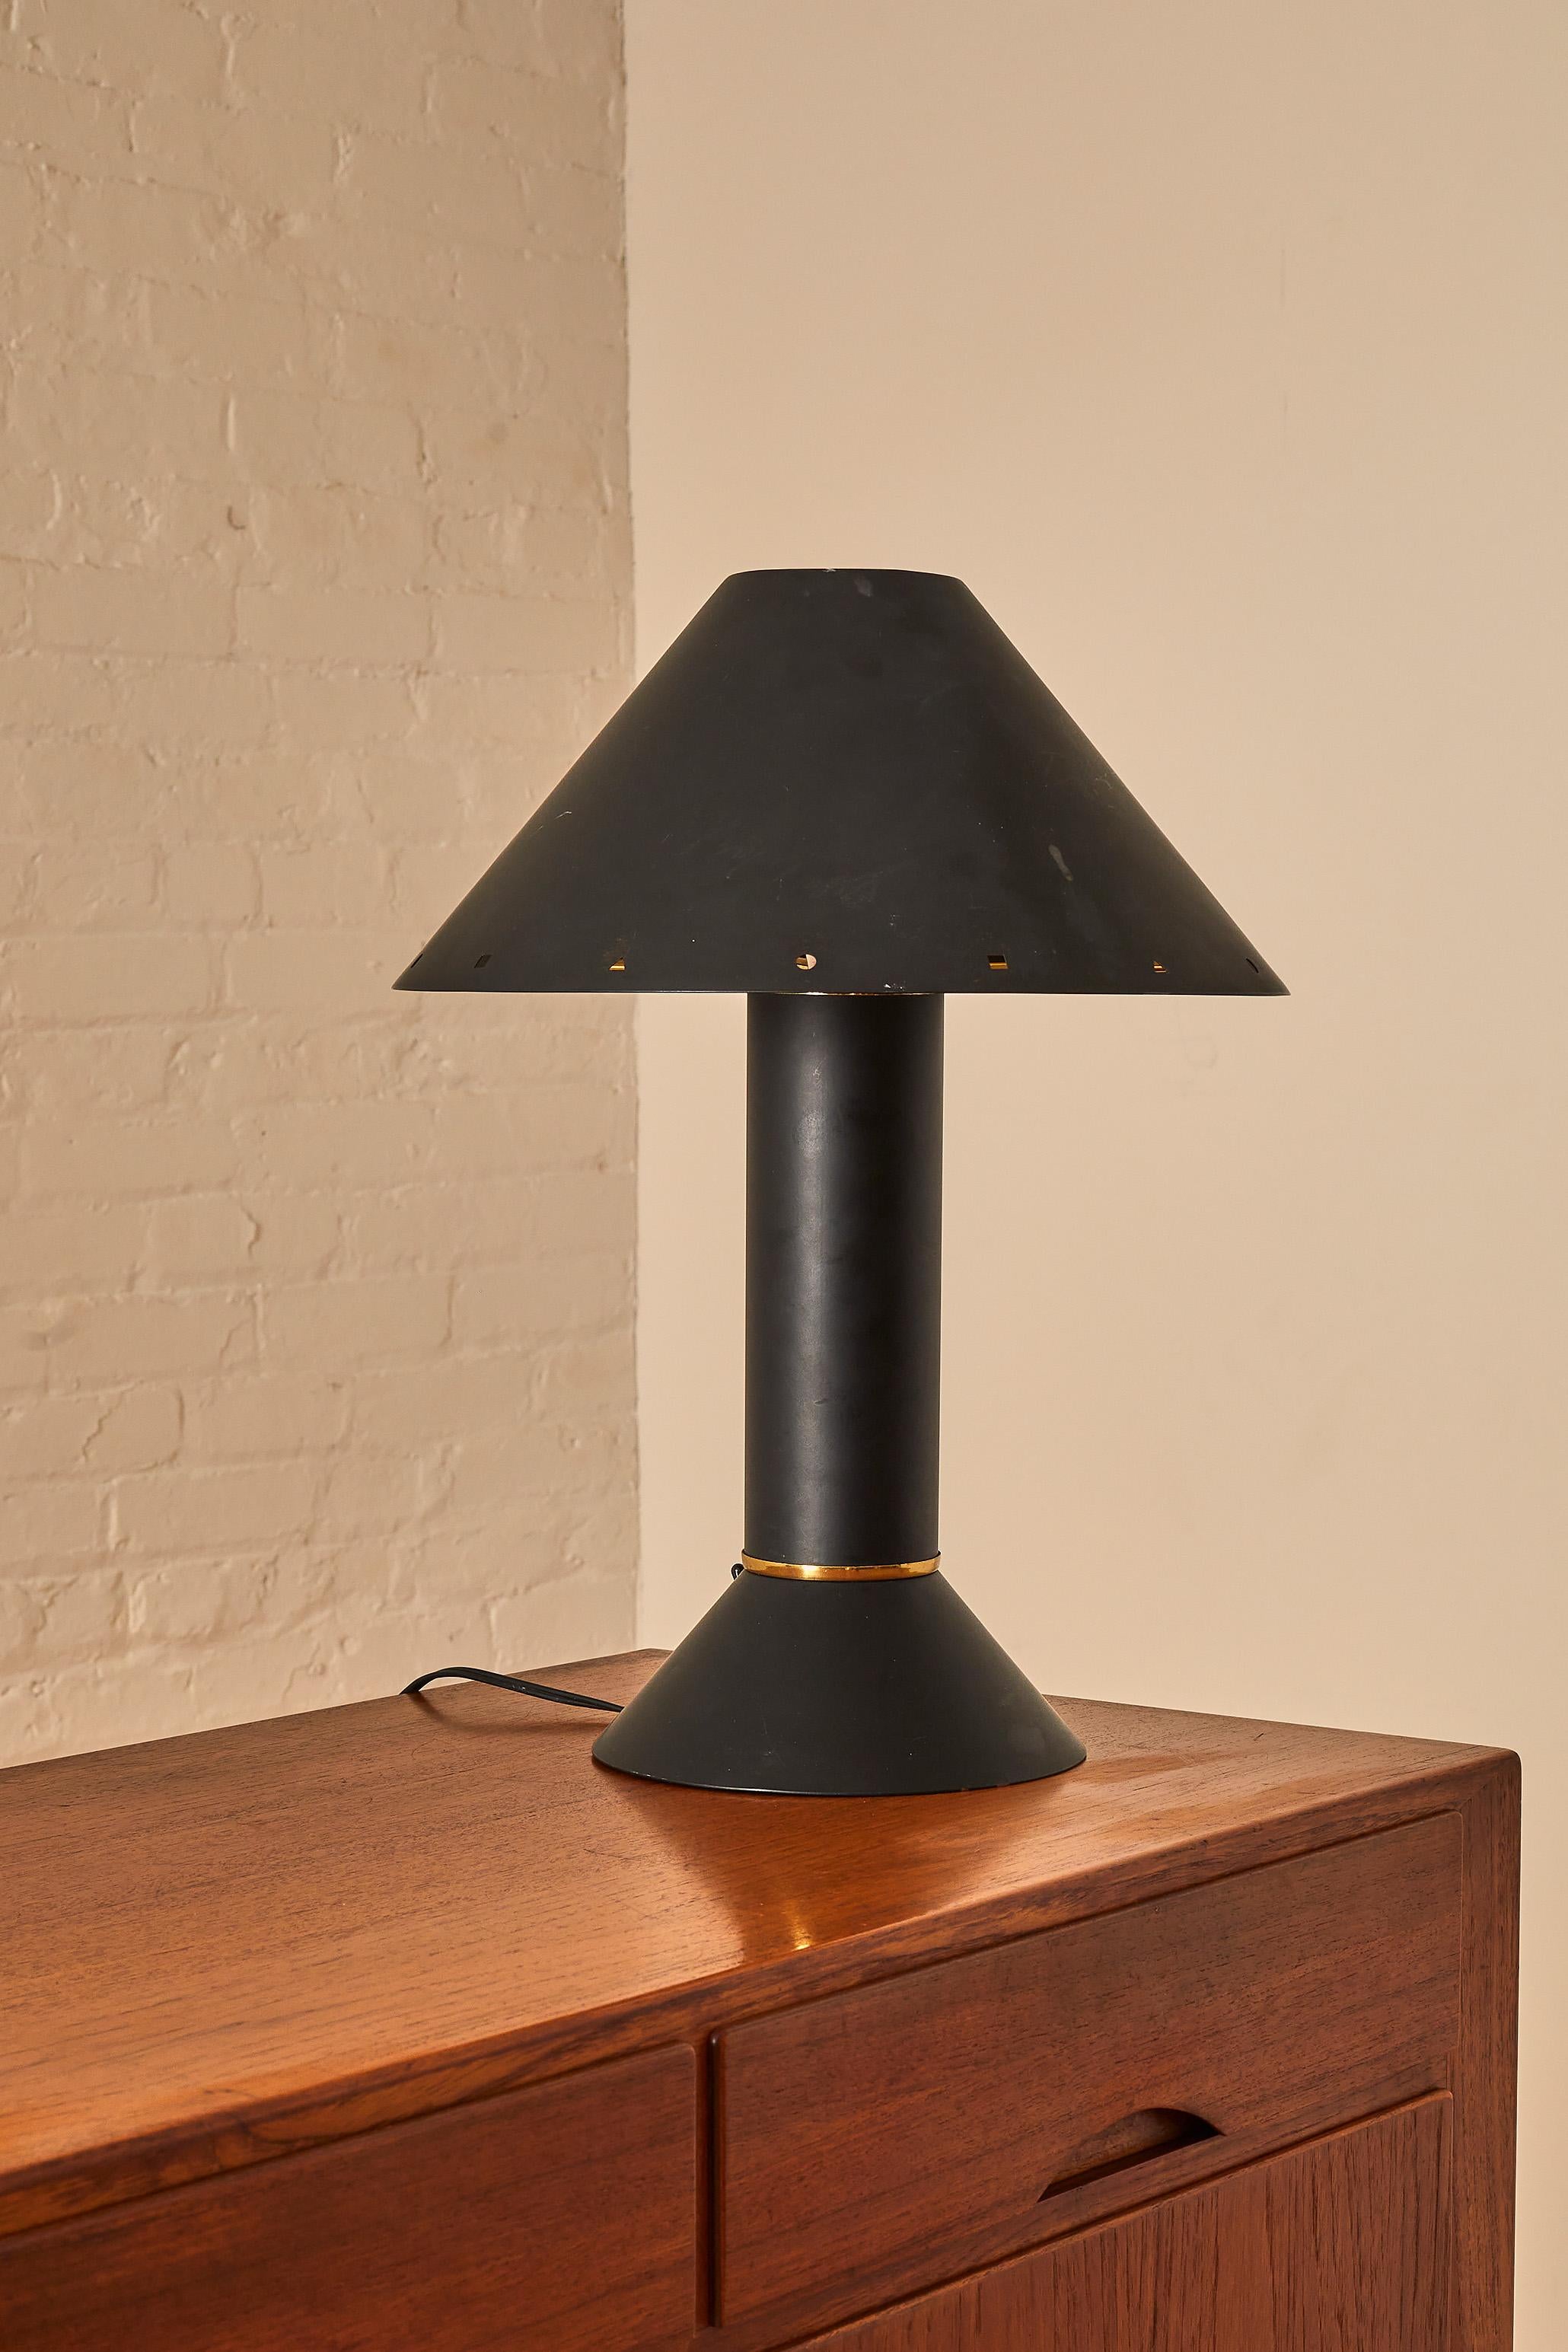 Postmodern Ron Rezek California copper table lamp. Classic form and motif of the era in Black metal. White enamel reflector shade attaches to base, outer copper shade rests on top.